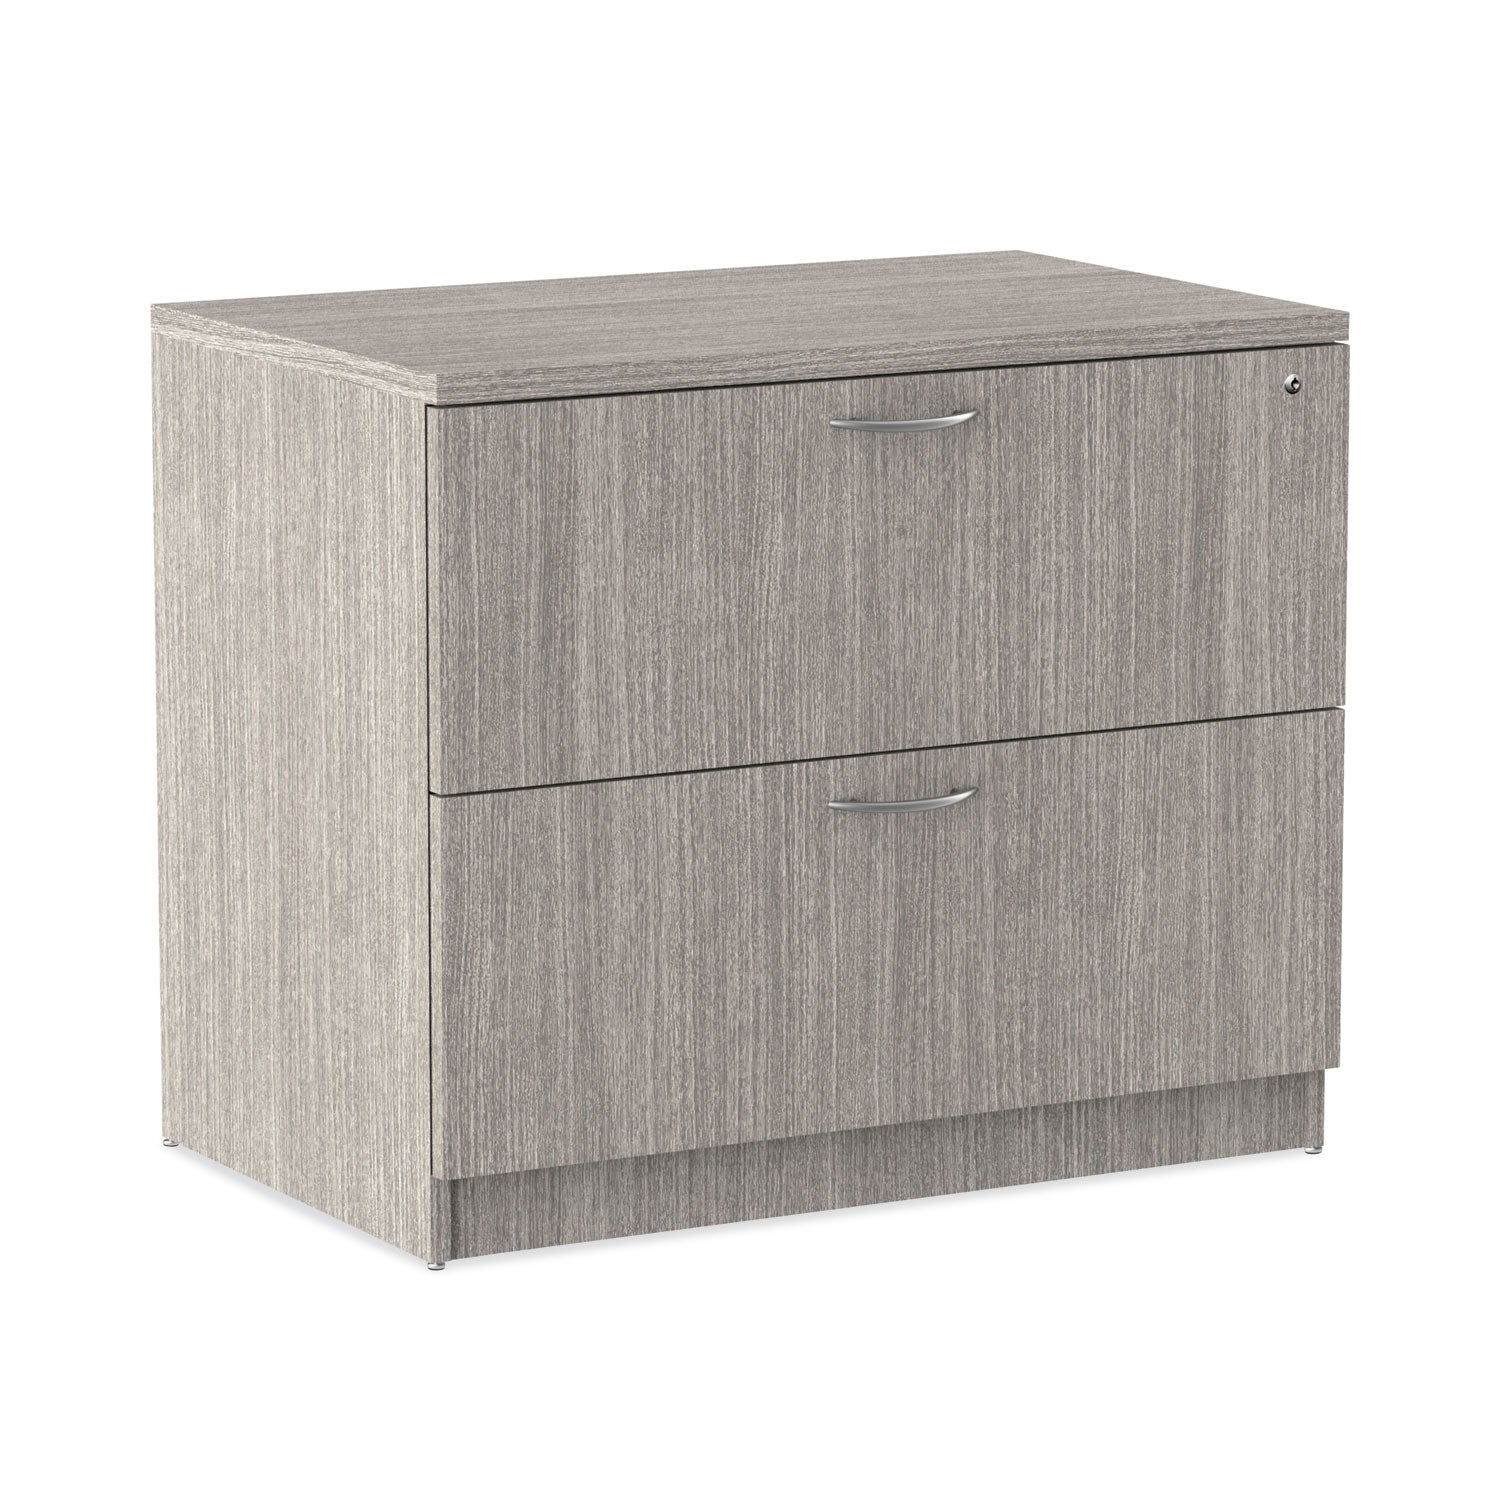 alera-valencia-series-lateral-file-2-legal-letter-size-file-drawers-gray-34-x-2275-x-295_aleva513622gy - 8